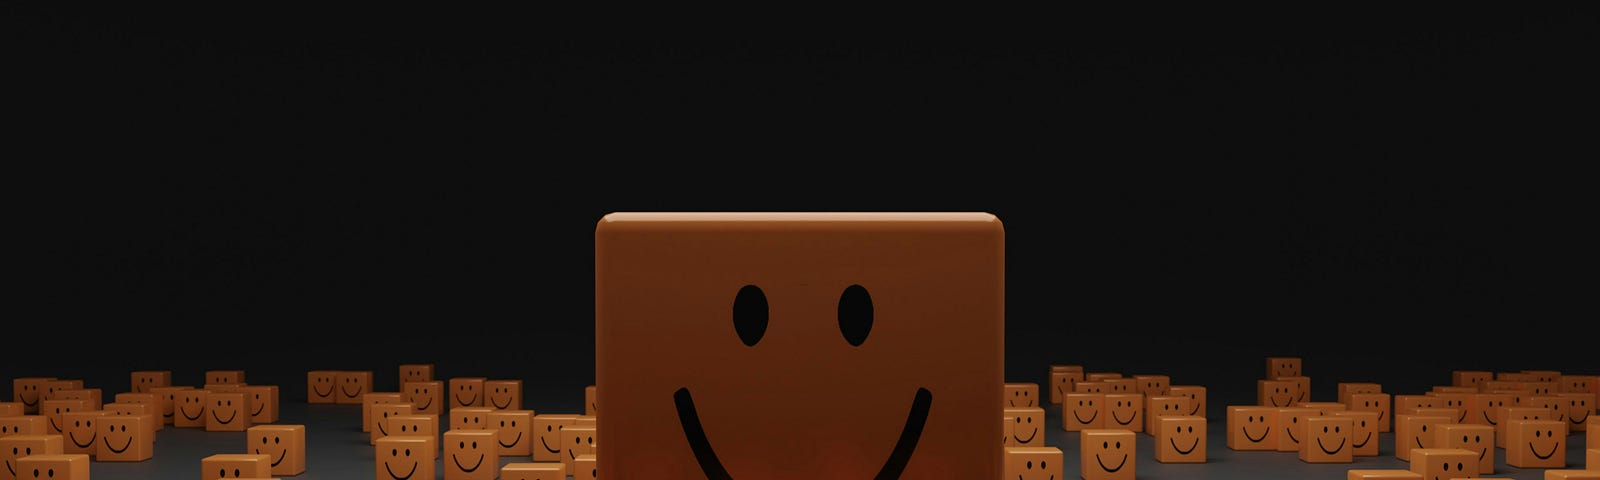 Image of cubes with smiley faces